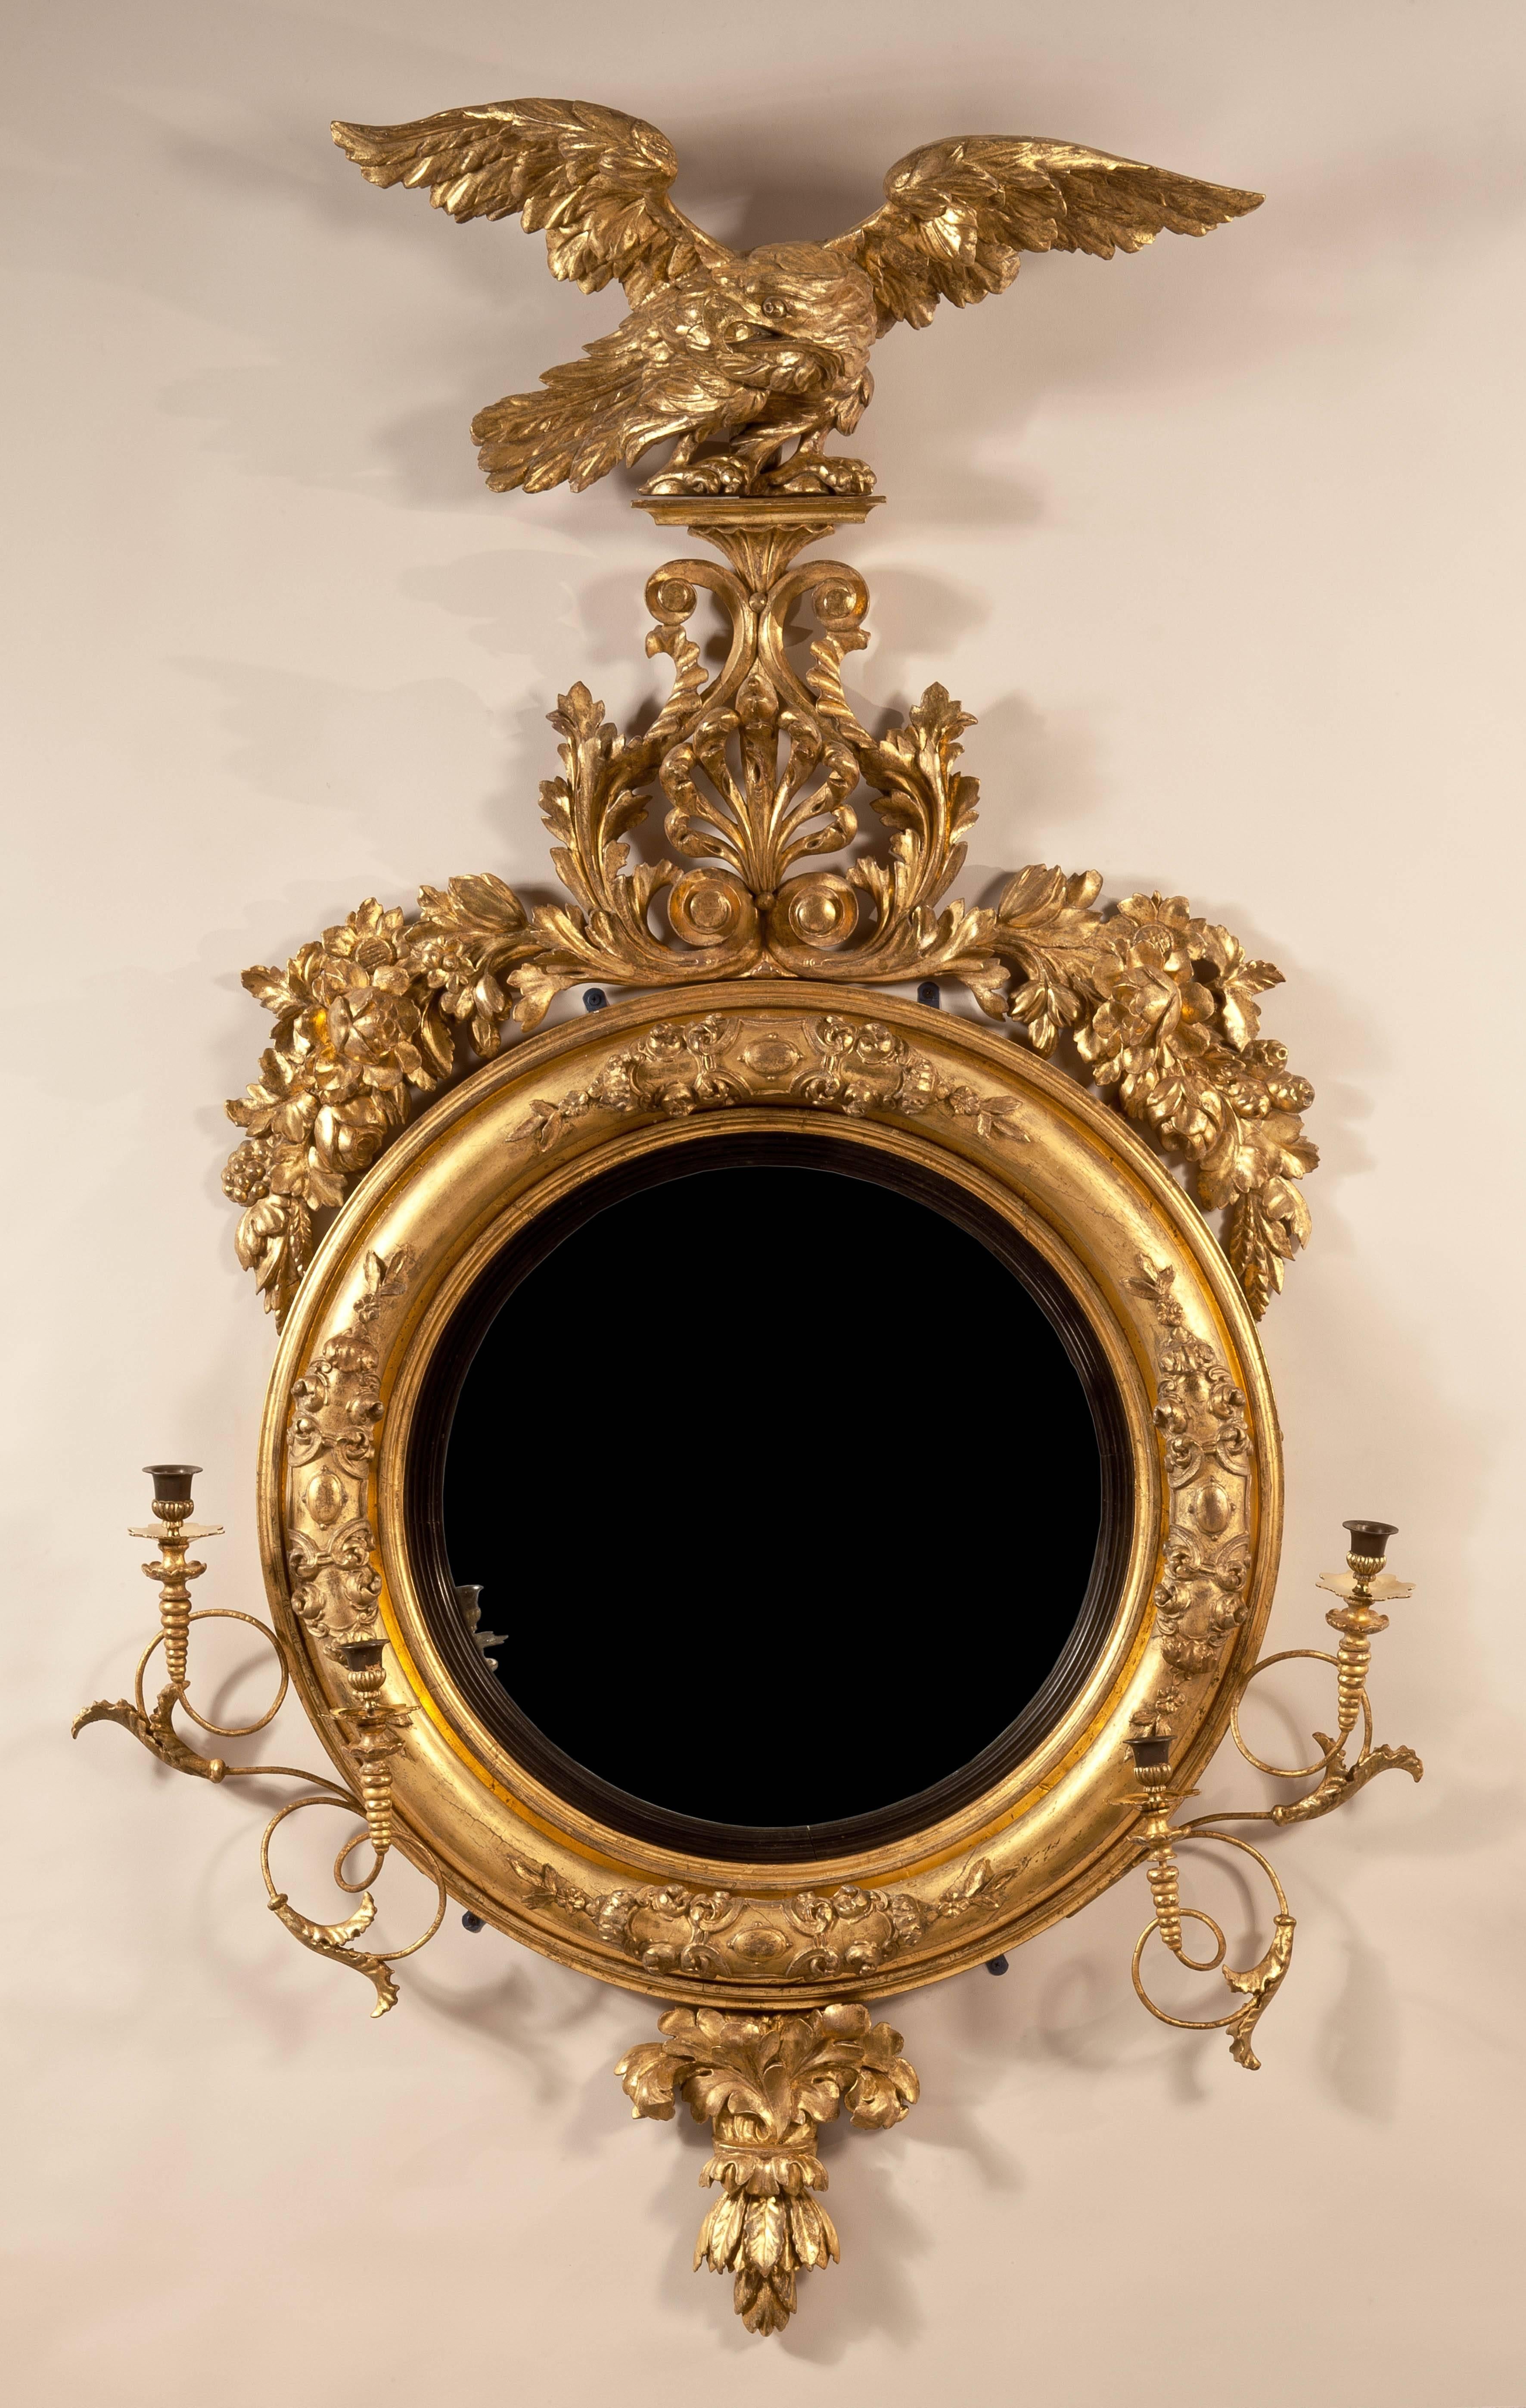 Surmounted with an Eagle and Anthemeon.
American or English, circa 1825.

A carved eagle with spread wings on a tapering platform above scrolled foliage and a pierced anthemion above a convex glass surrounded by an ebonized mirror slip and gilded